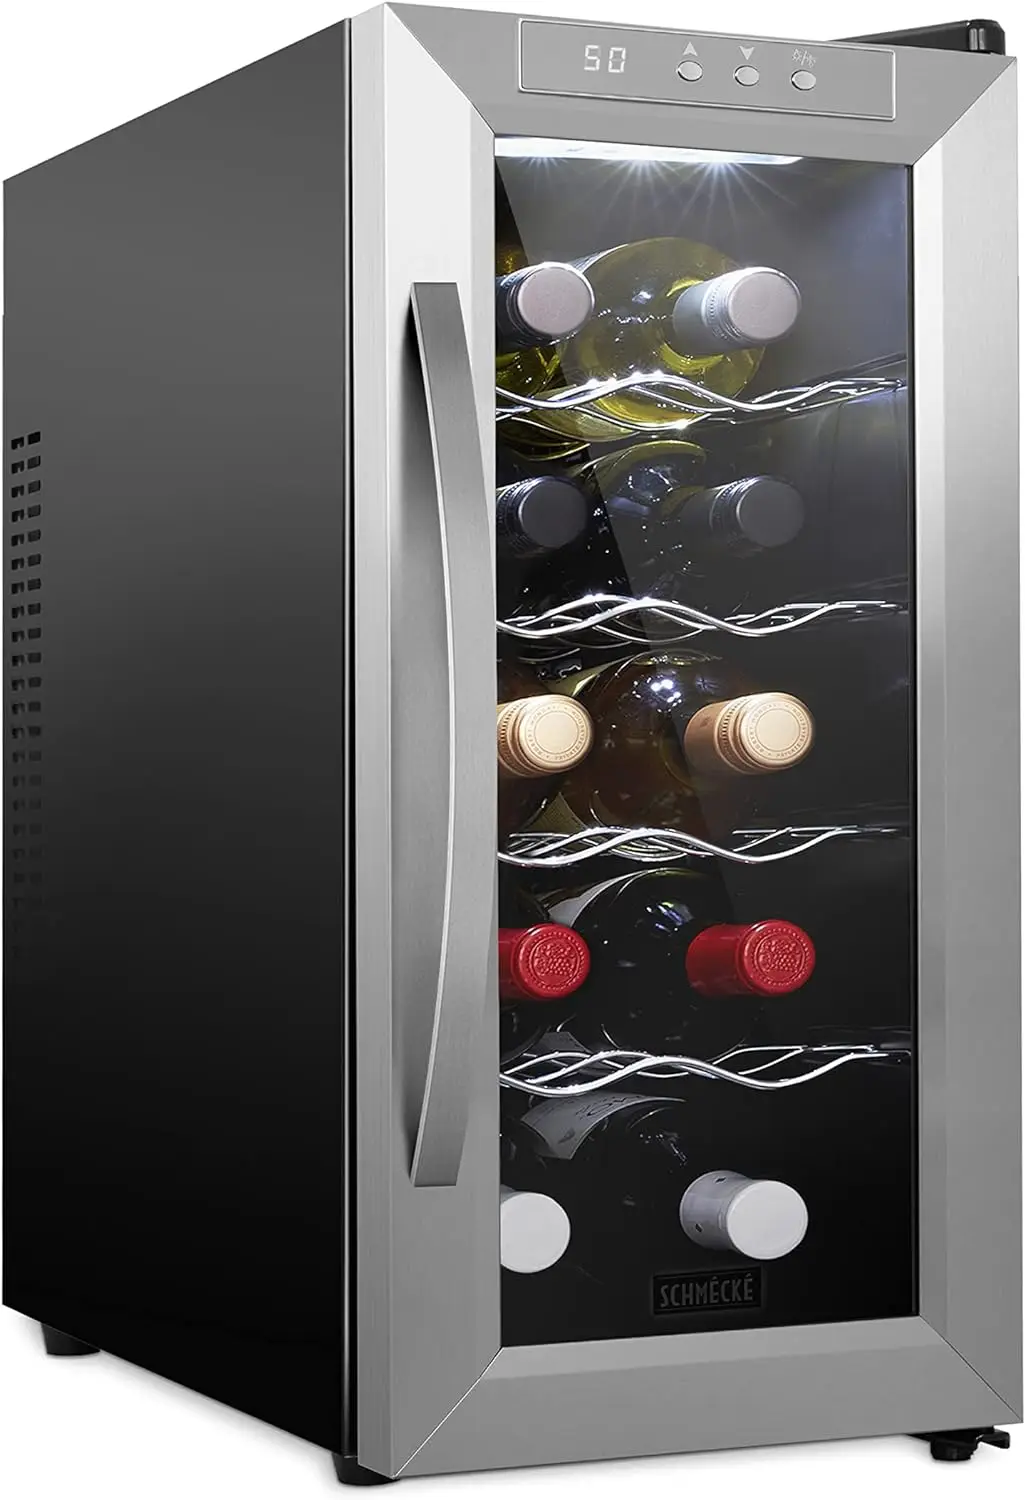 

10 Bottle Thermoelectric Wine Cooler/Chiller - Stainless Steel - Counter Top Red & White Wine Cellar w/Digital Temperature, Min